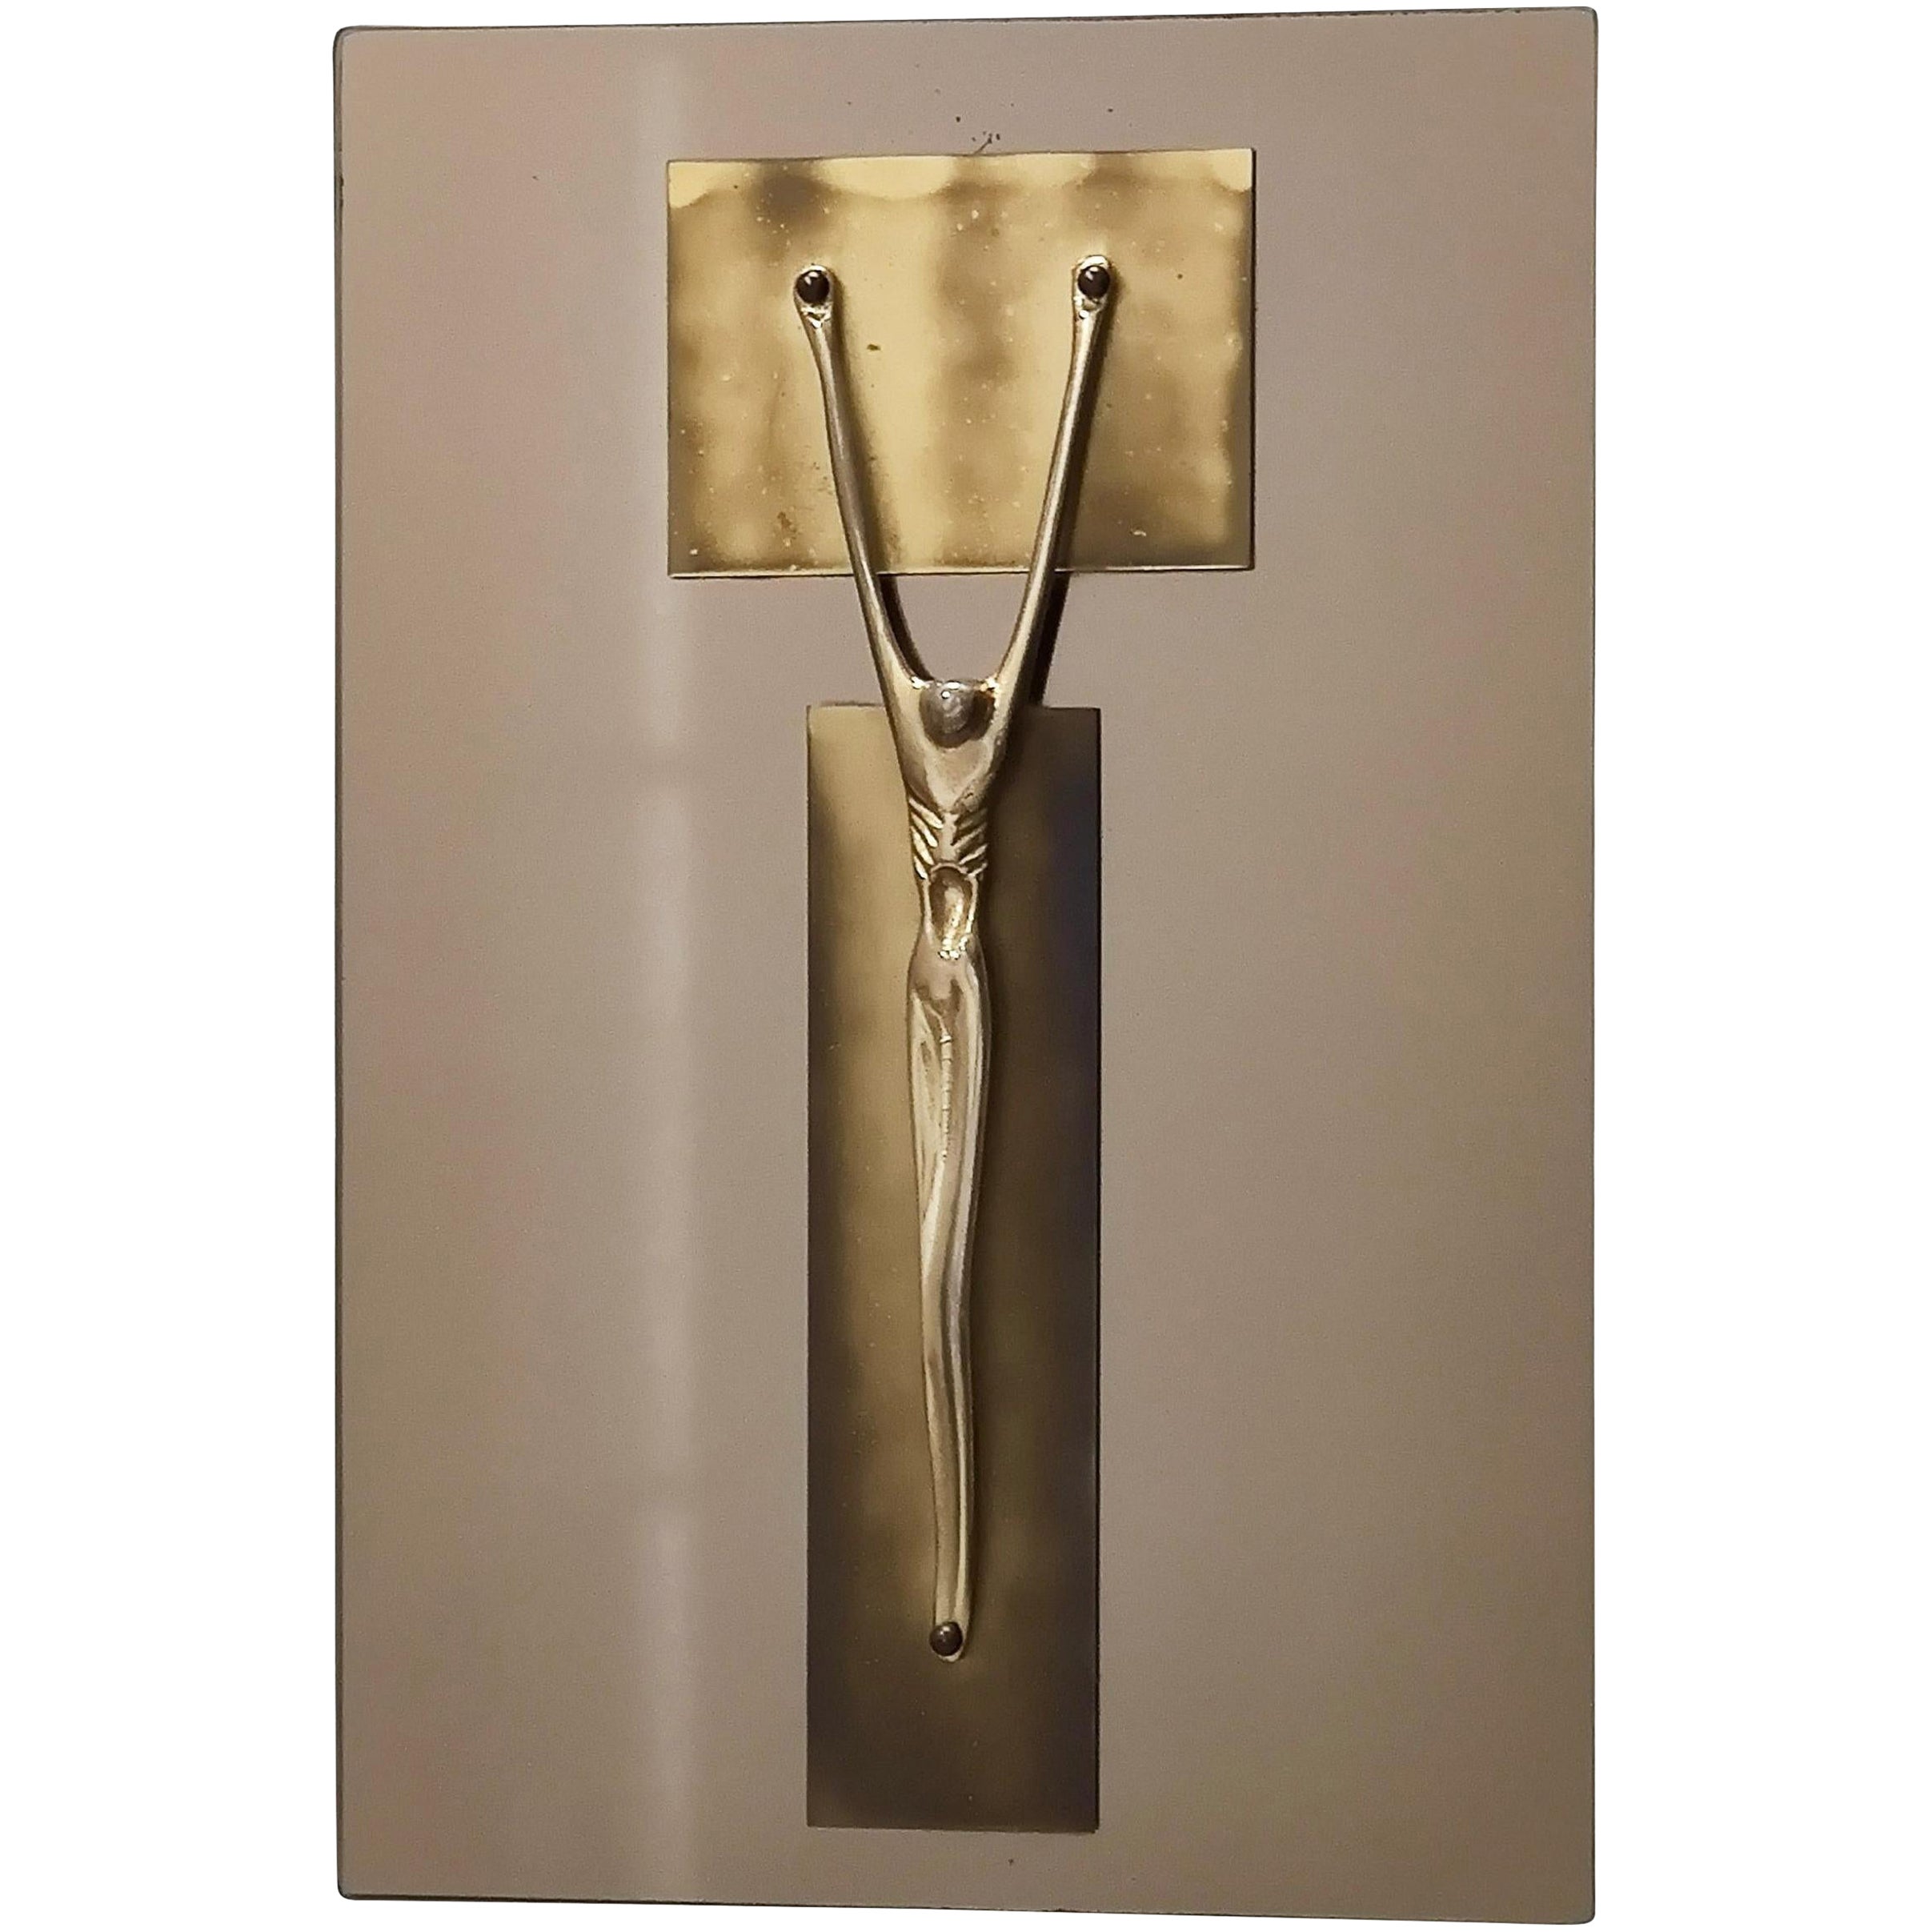 Postmodern Brass and Mirror Crucifix in the Style of Fontana Arte, Italy